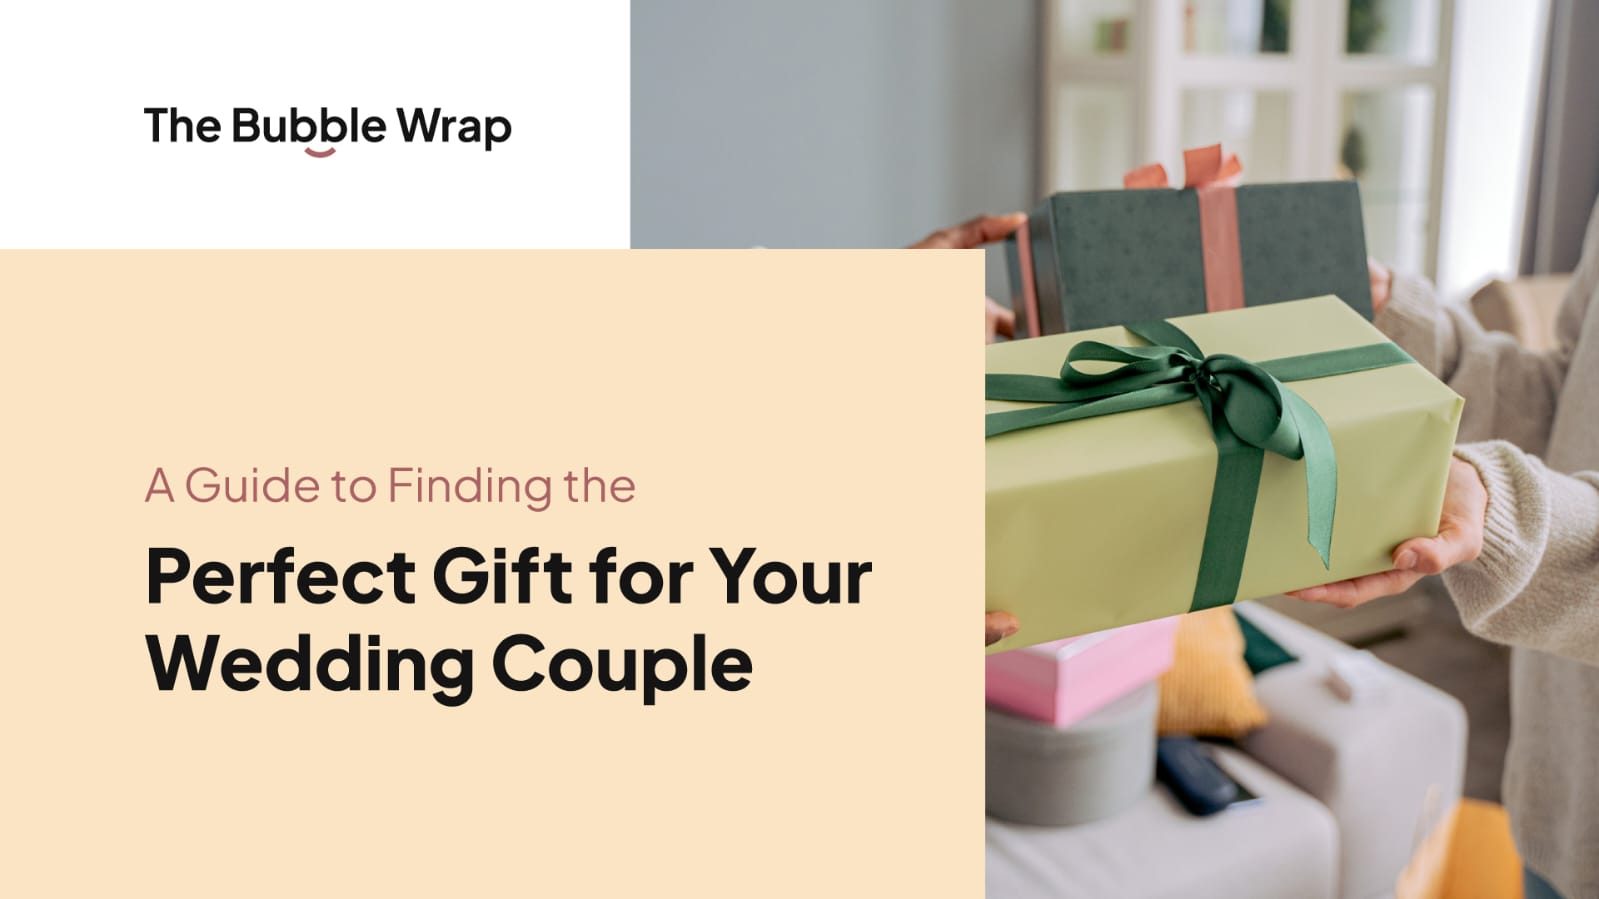 A Guide to Finding the Perfect Gift for Your Wedding Couple